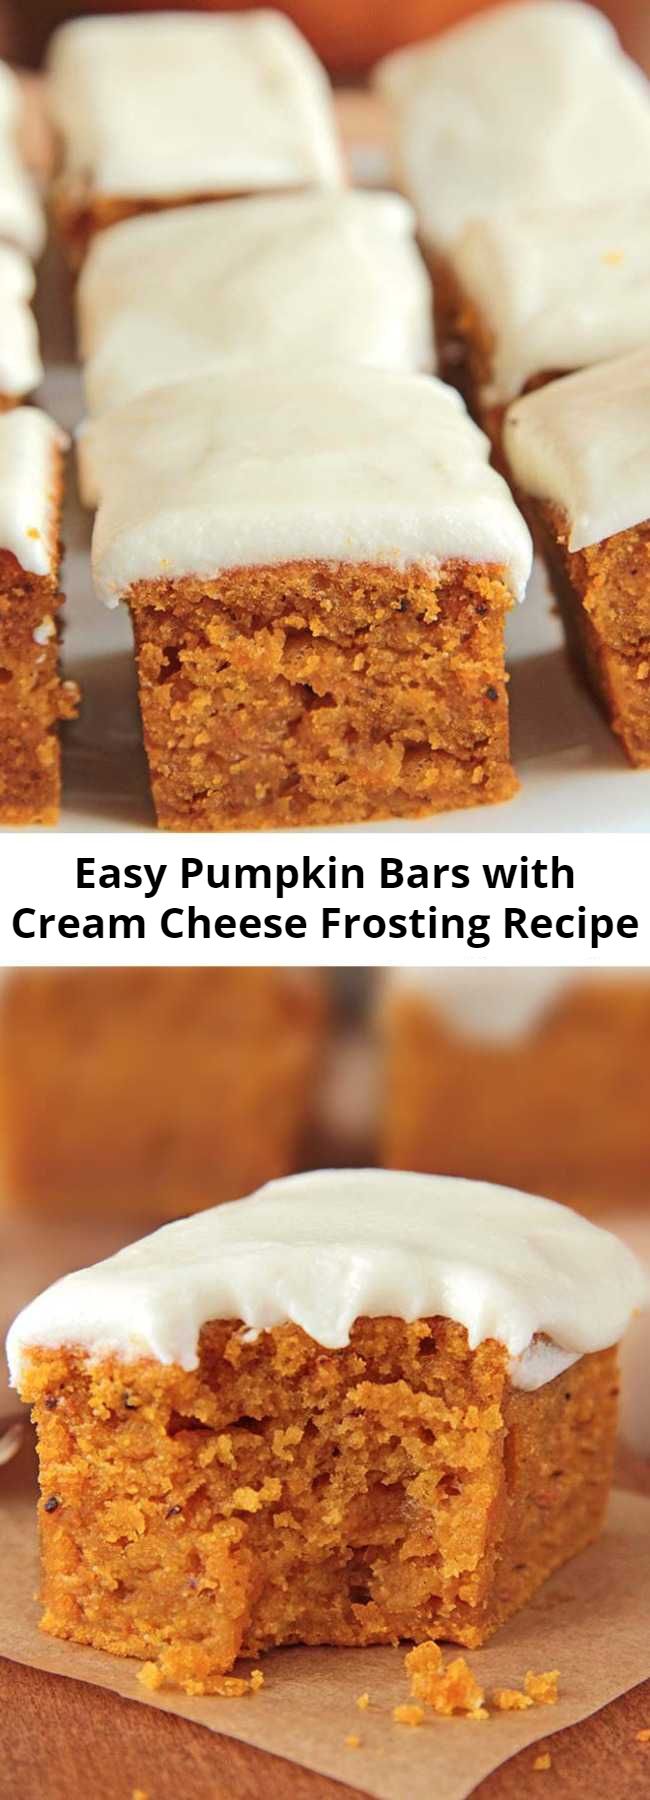 Easy Pumpkin Bars with Cream Cheese Frosting Recipe - A perfect fall dessert, delicious pumpkin bars with cream cheese frosting. These pumpkin pie bars are a delicious cross between a quick bread and a delicate cake, loaded with pumpkin and topped with a delicate cream cheese frosting.